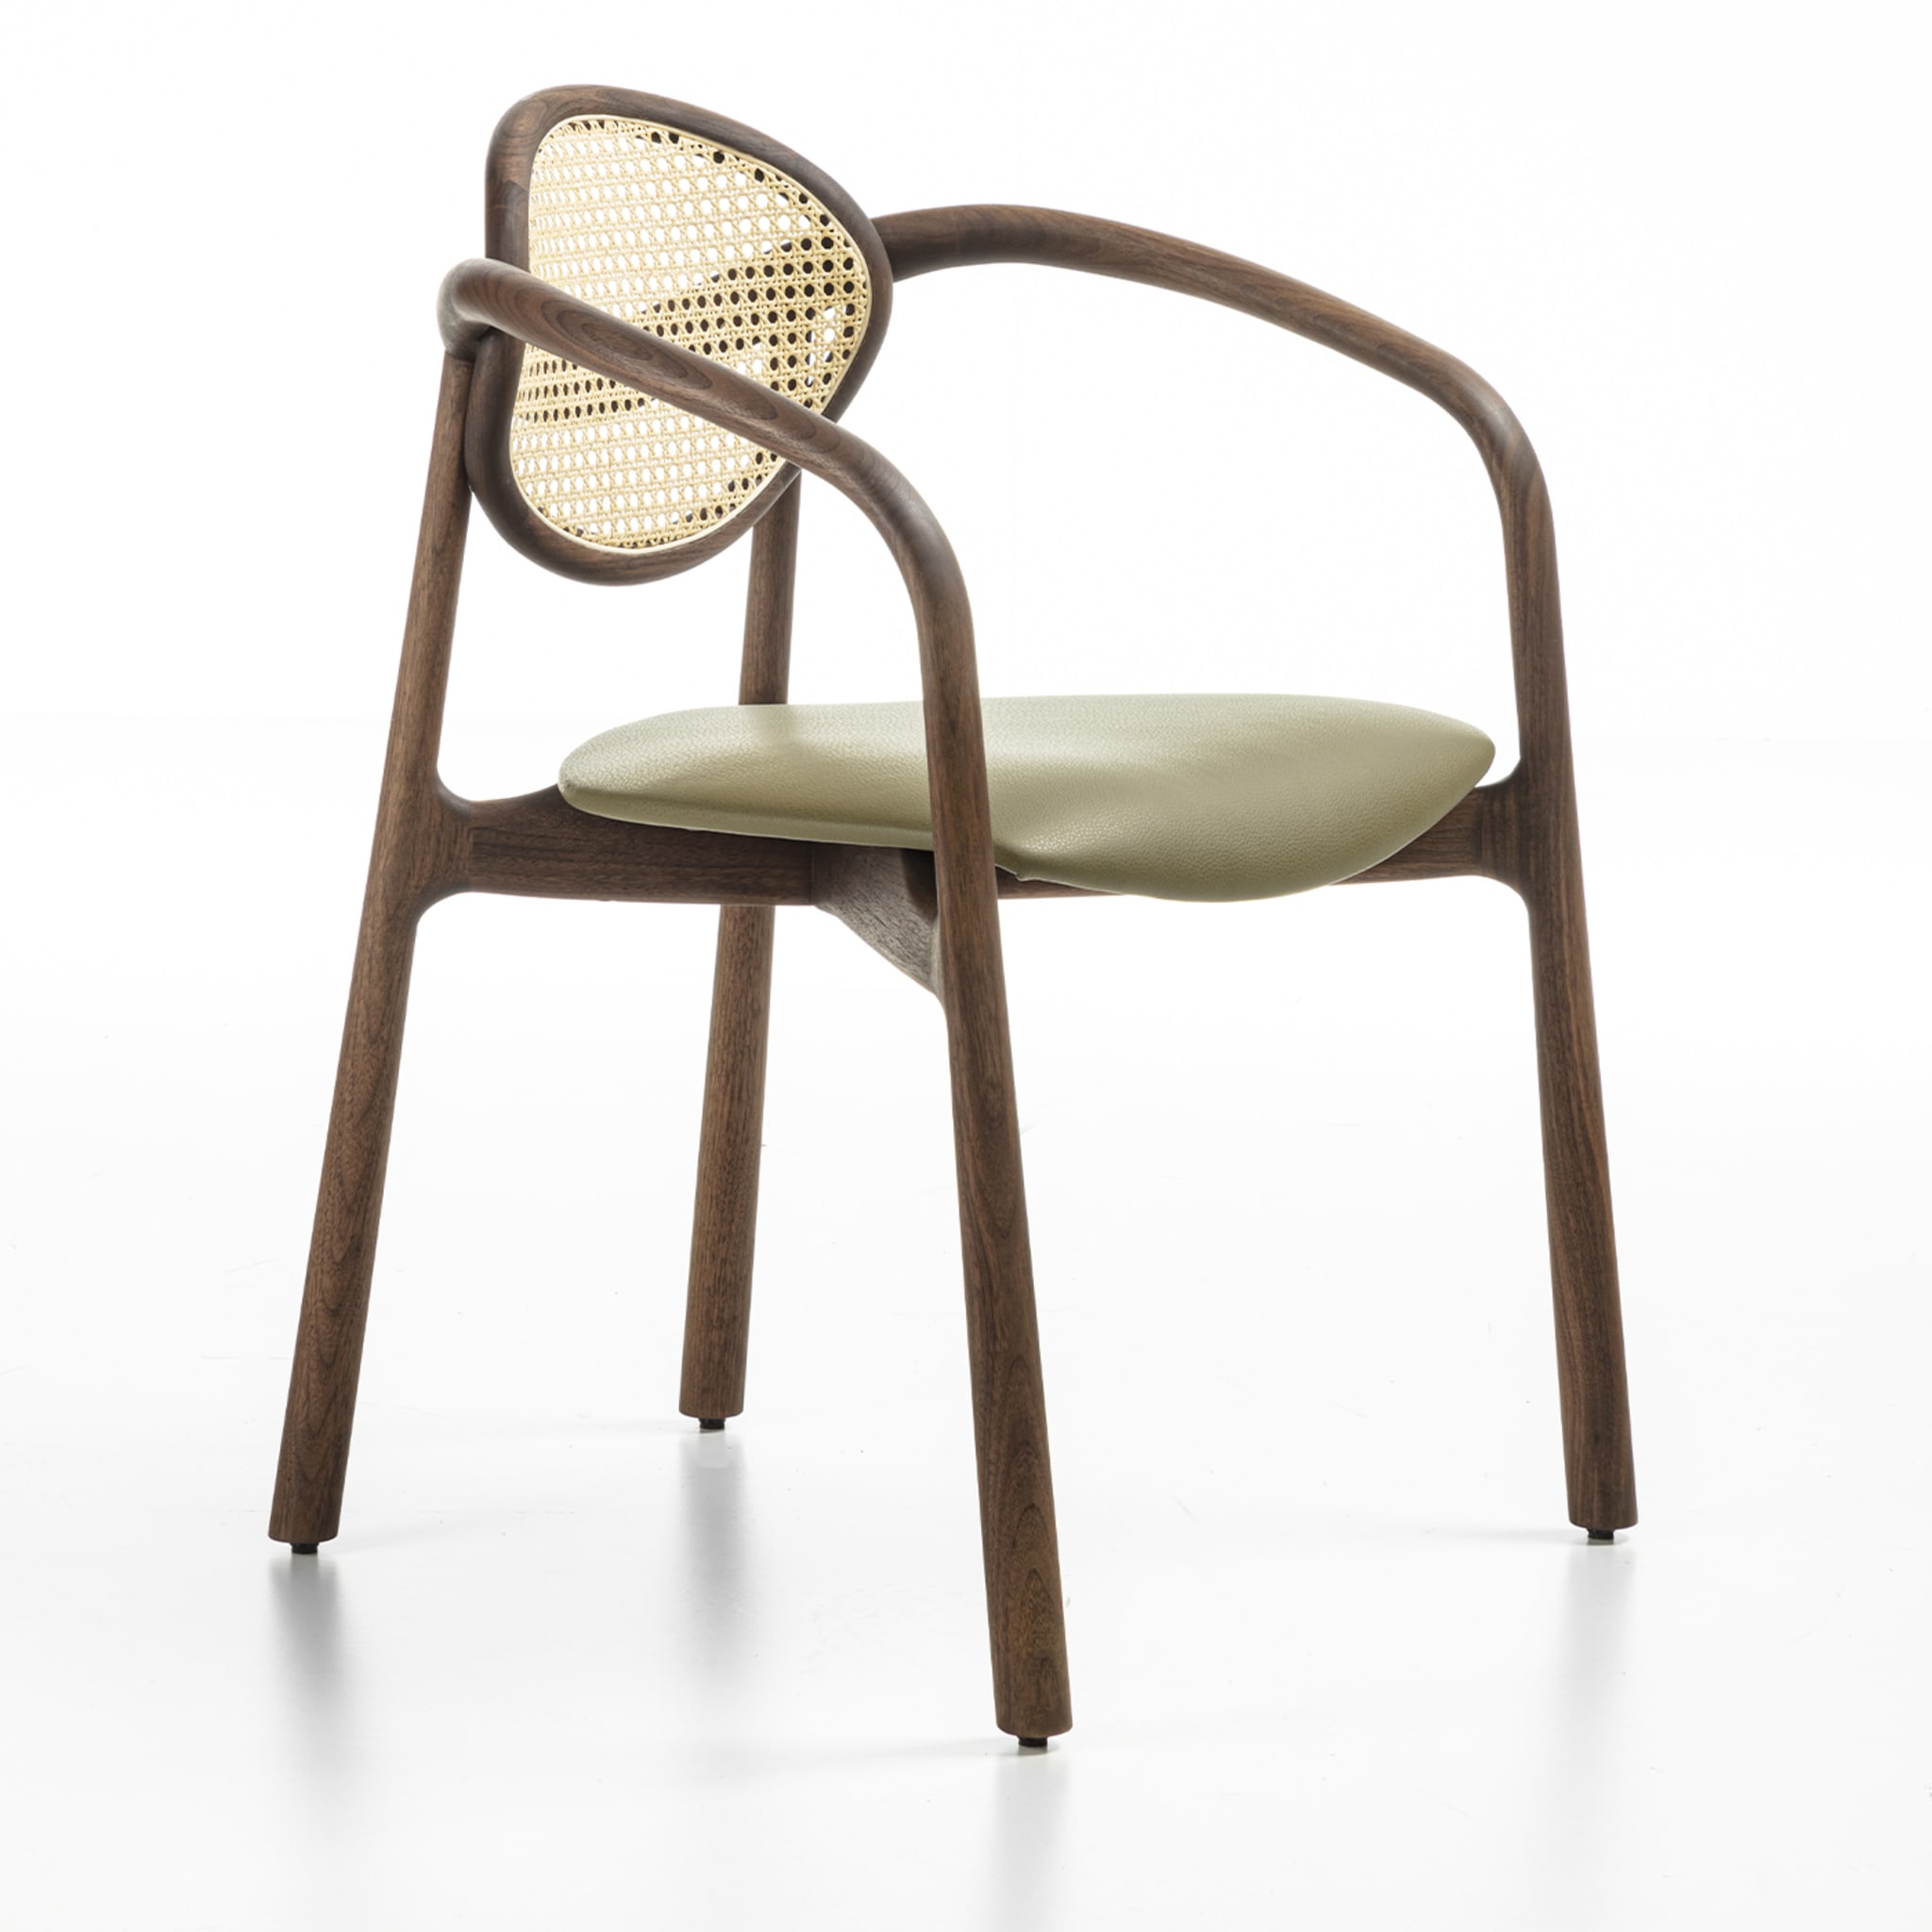 Marlena Green Chair With Arms by Studio Nove.3 - Alternative view 5